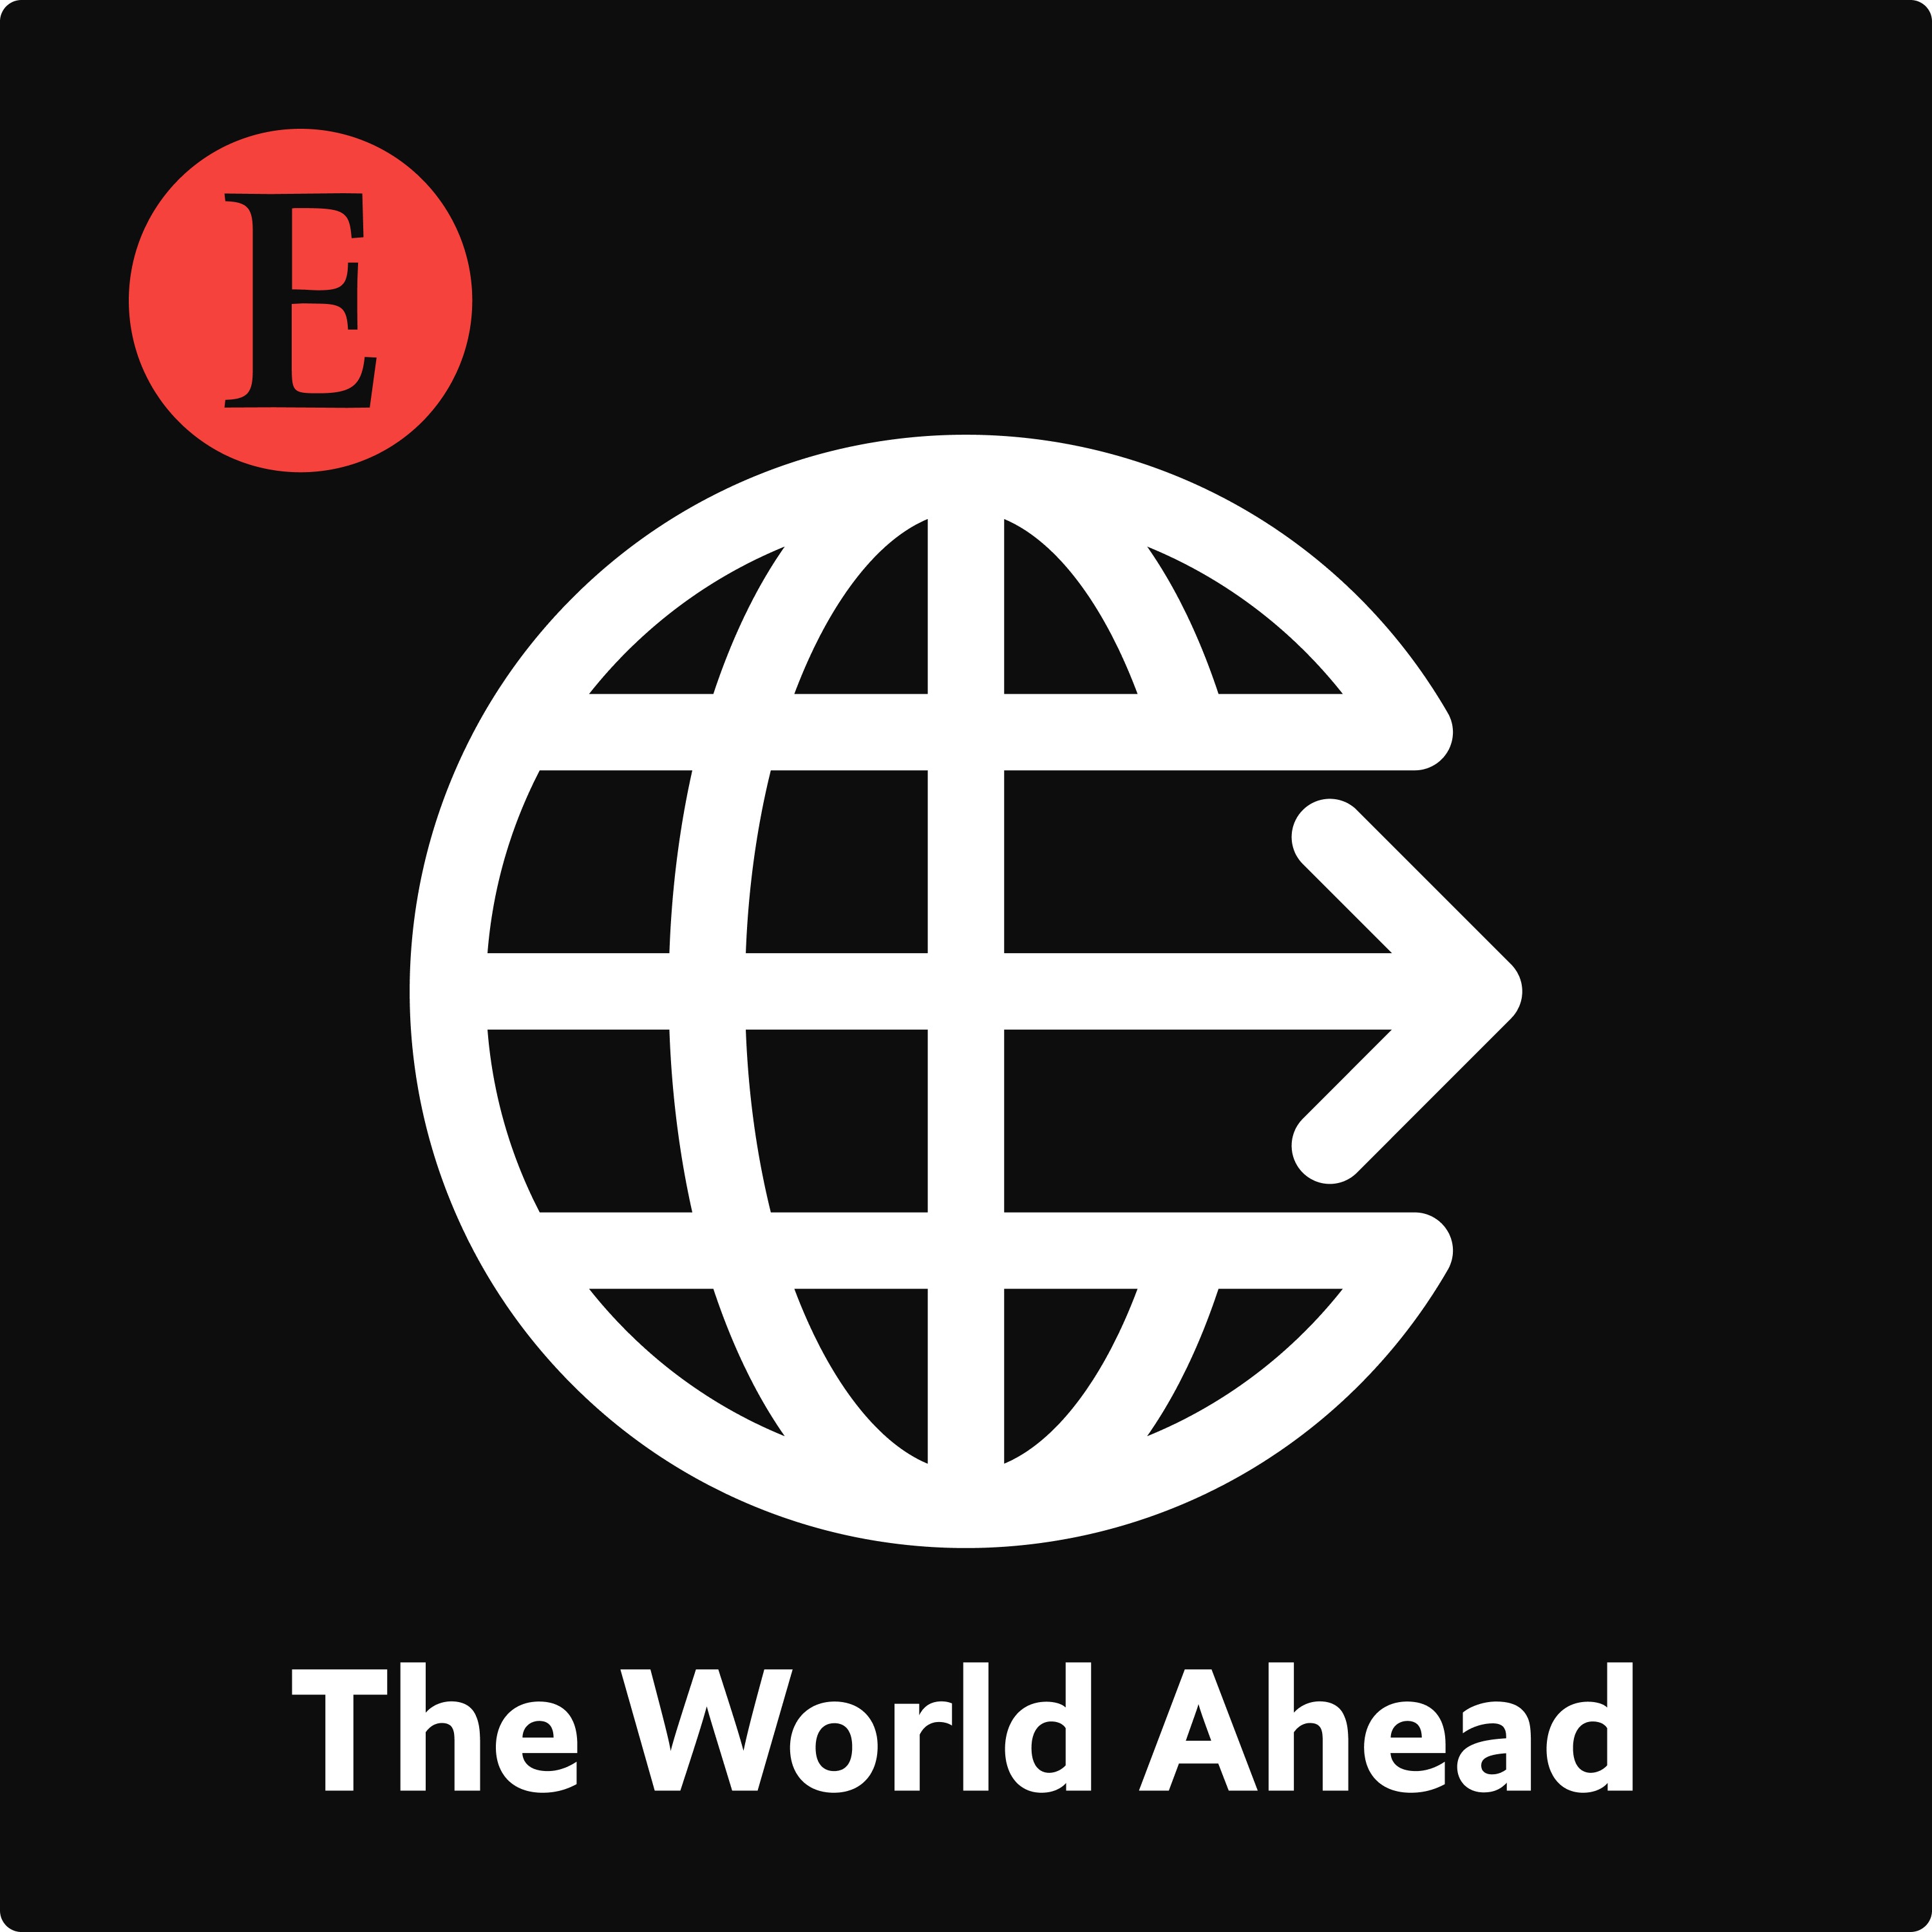 The World Ahead from The Economist podcast